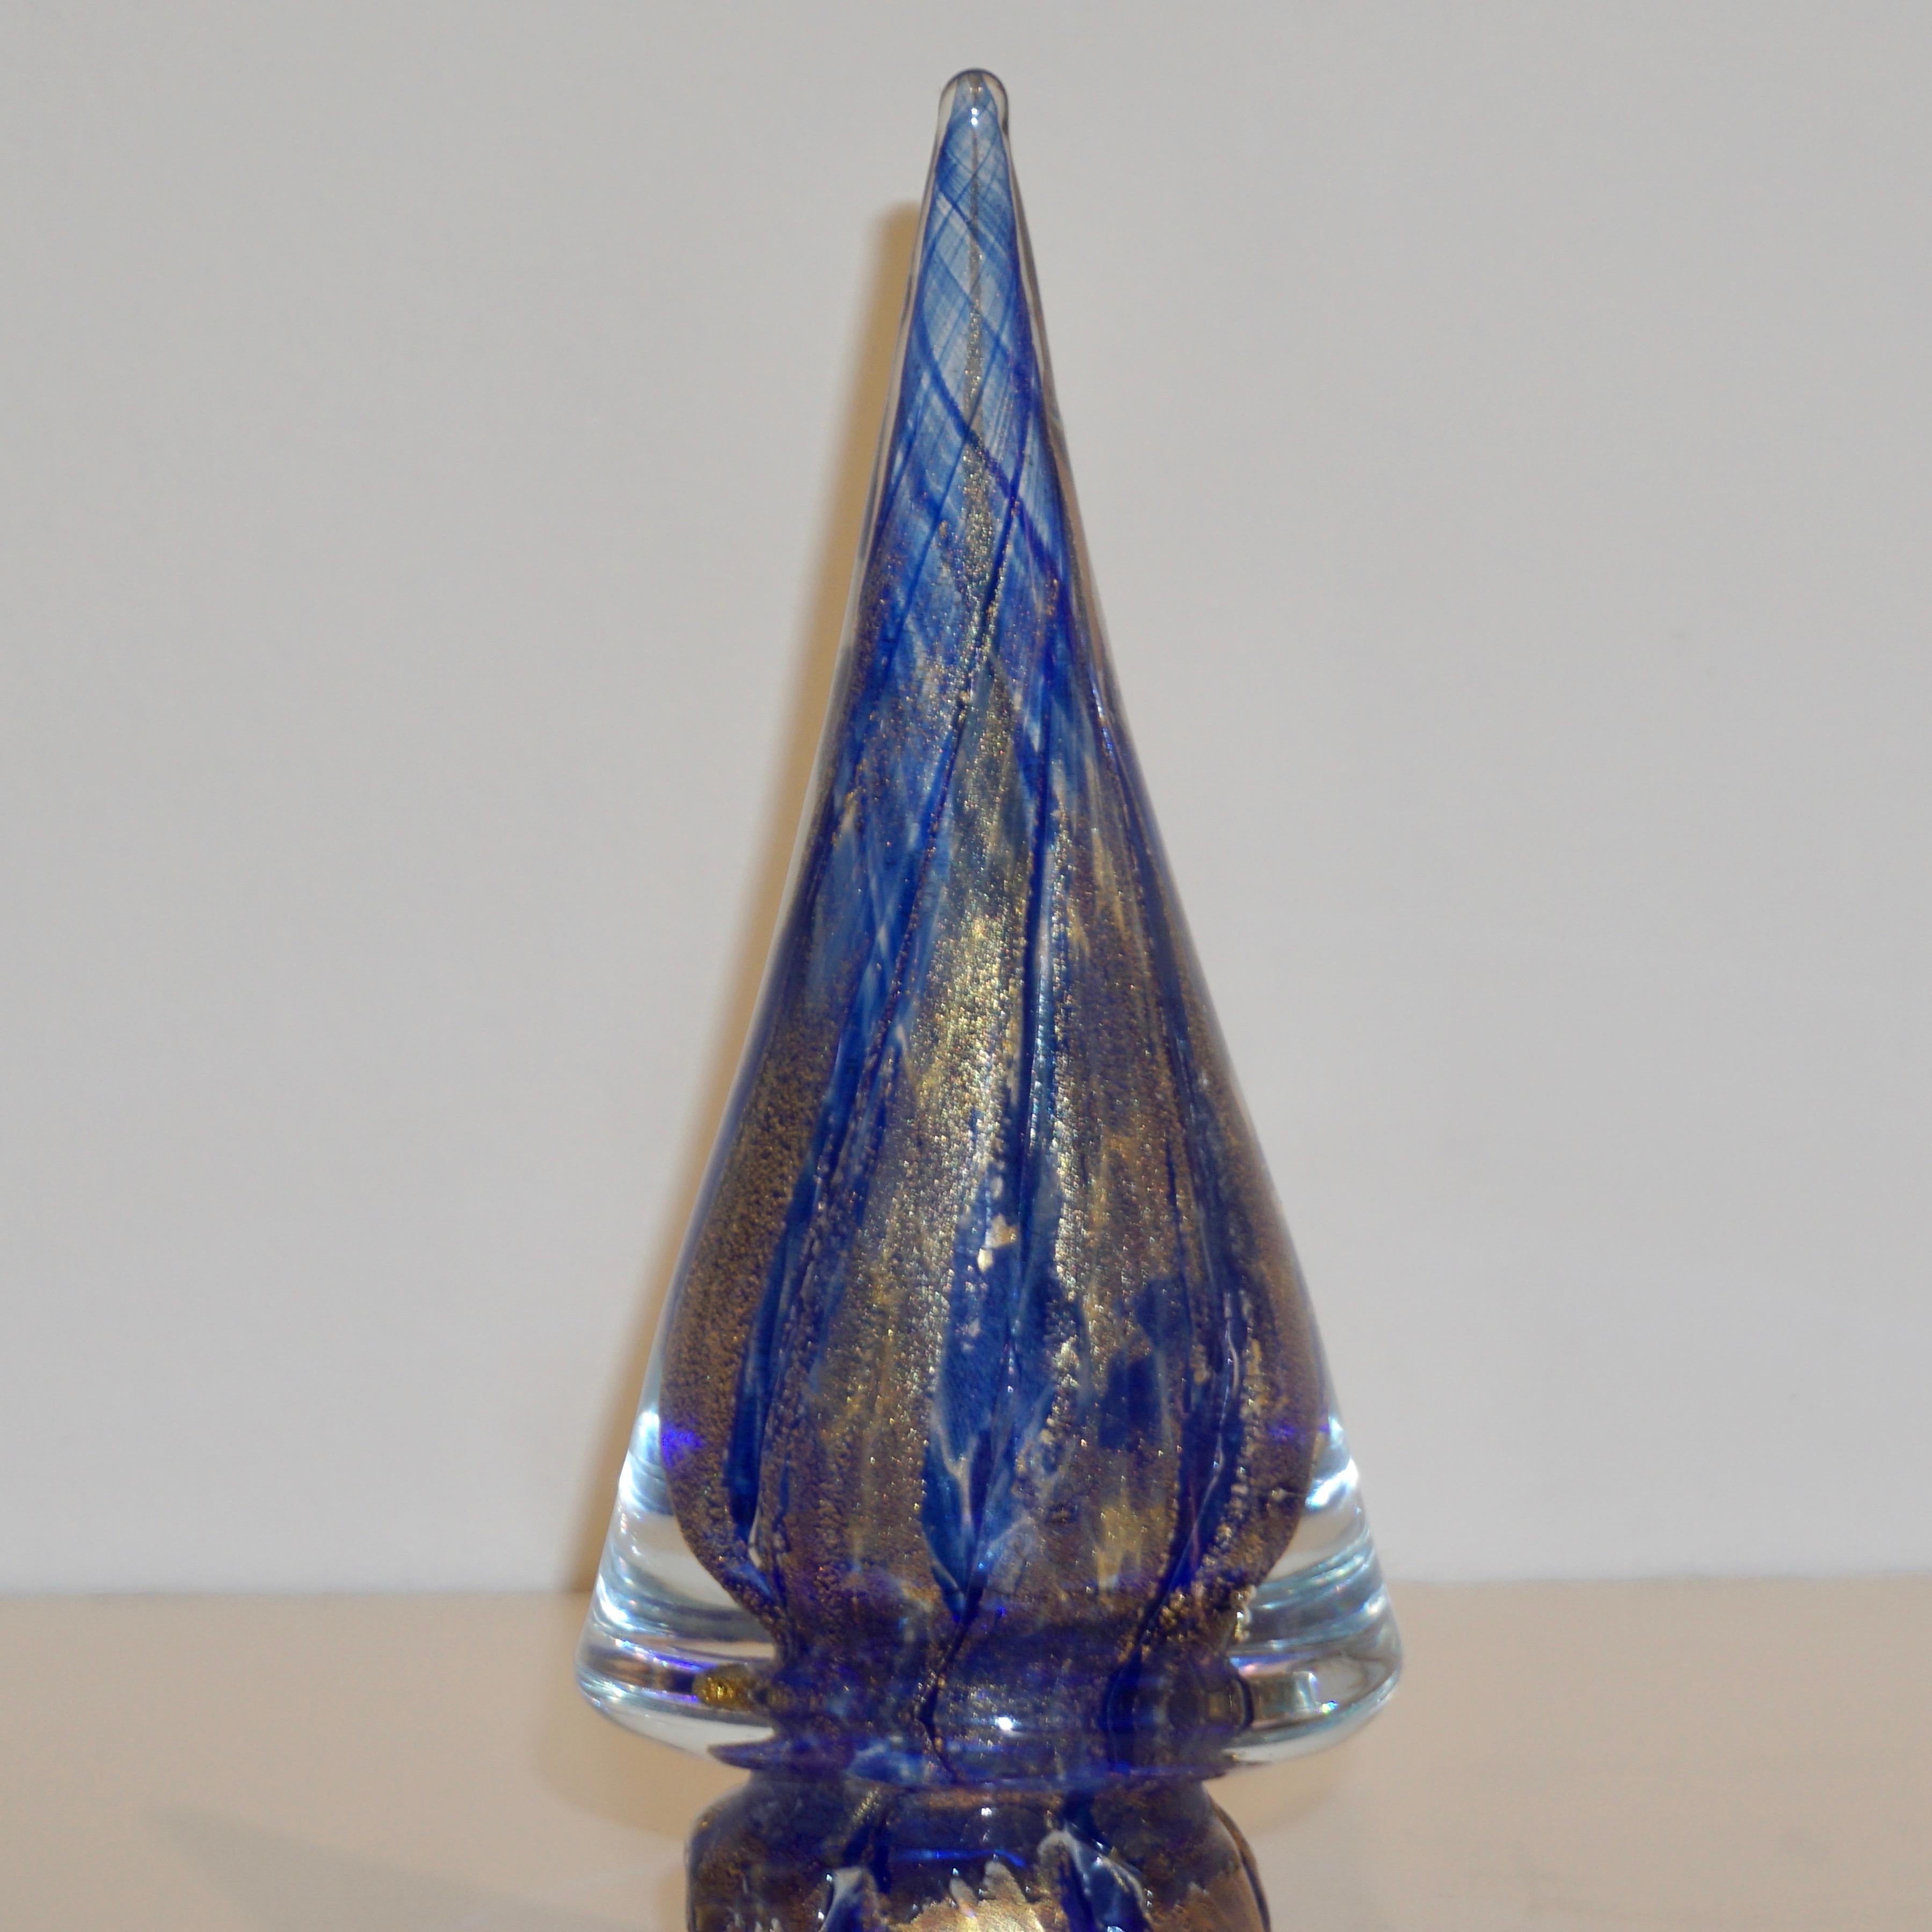 Formia 1980s Italian Vintage Royal Blue and Gold Murano Glass Tree Sculpture 3